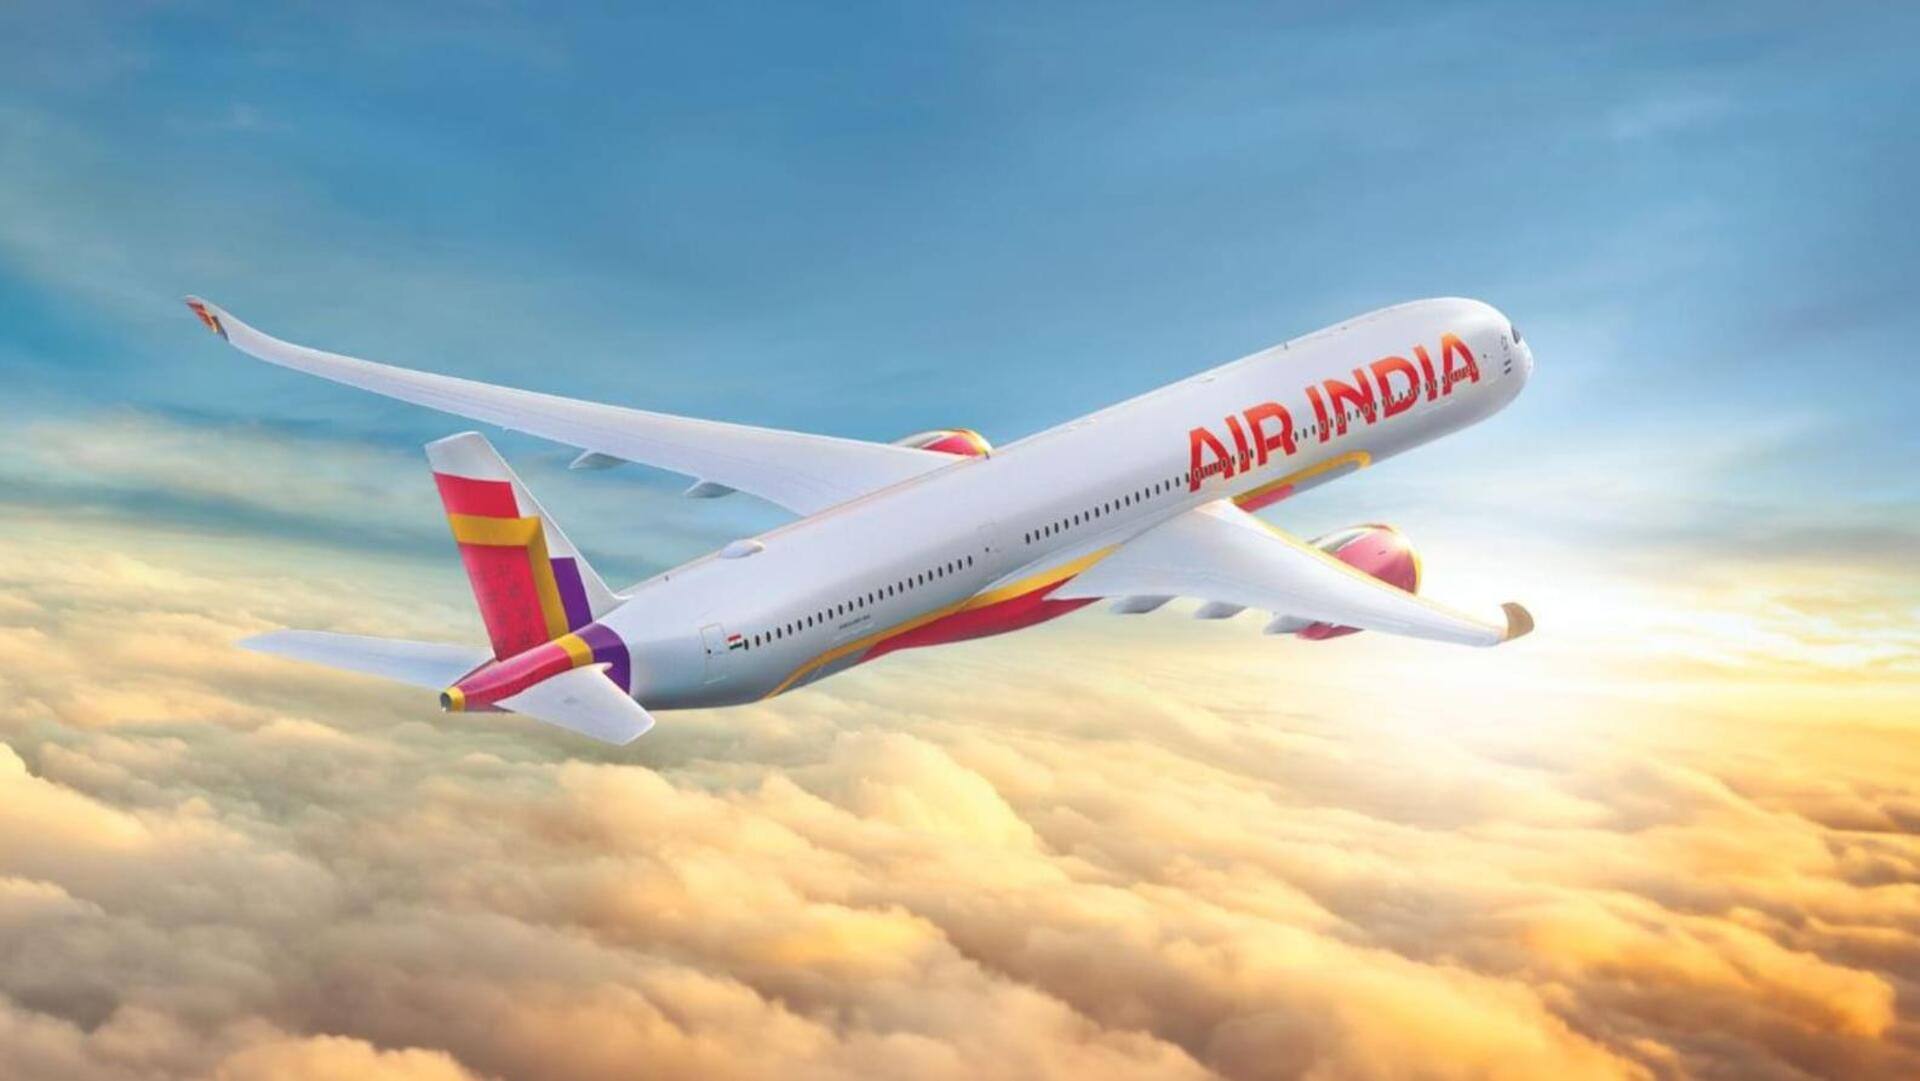 Air India announces special sale on Bangkok and Singapore routes